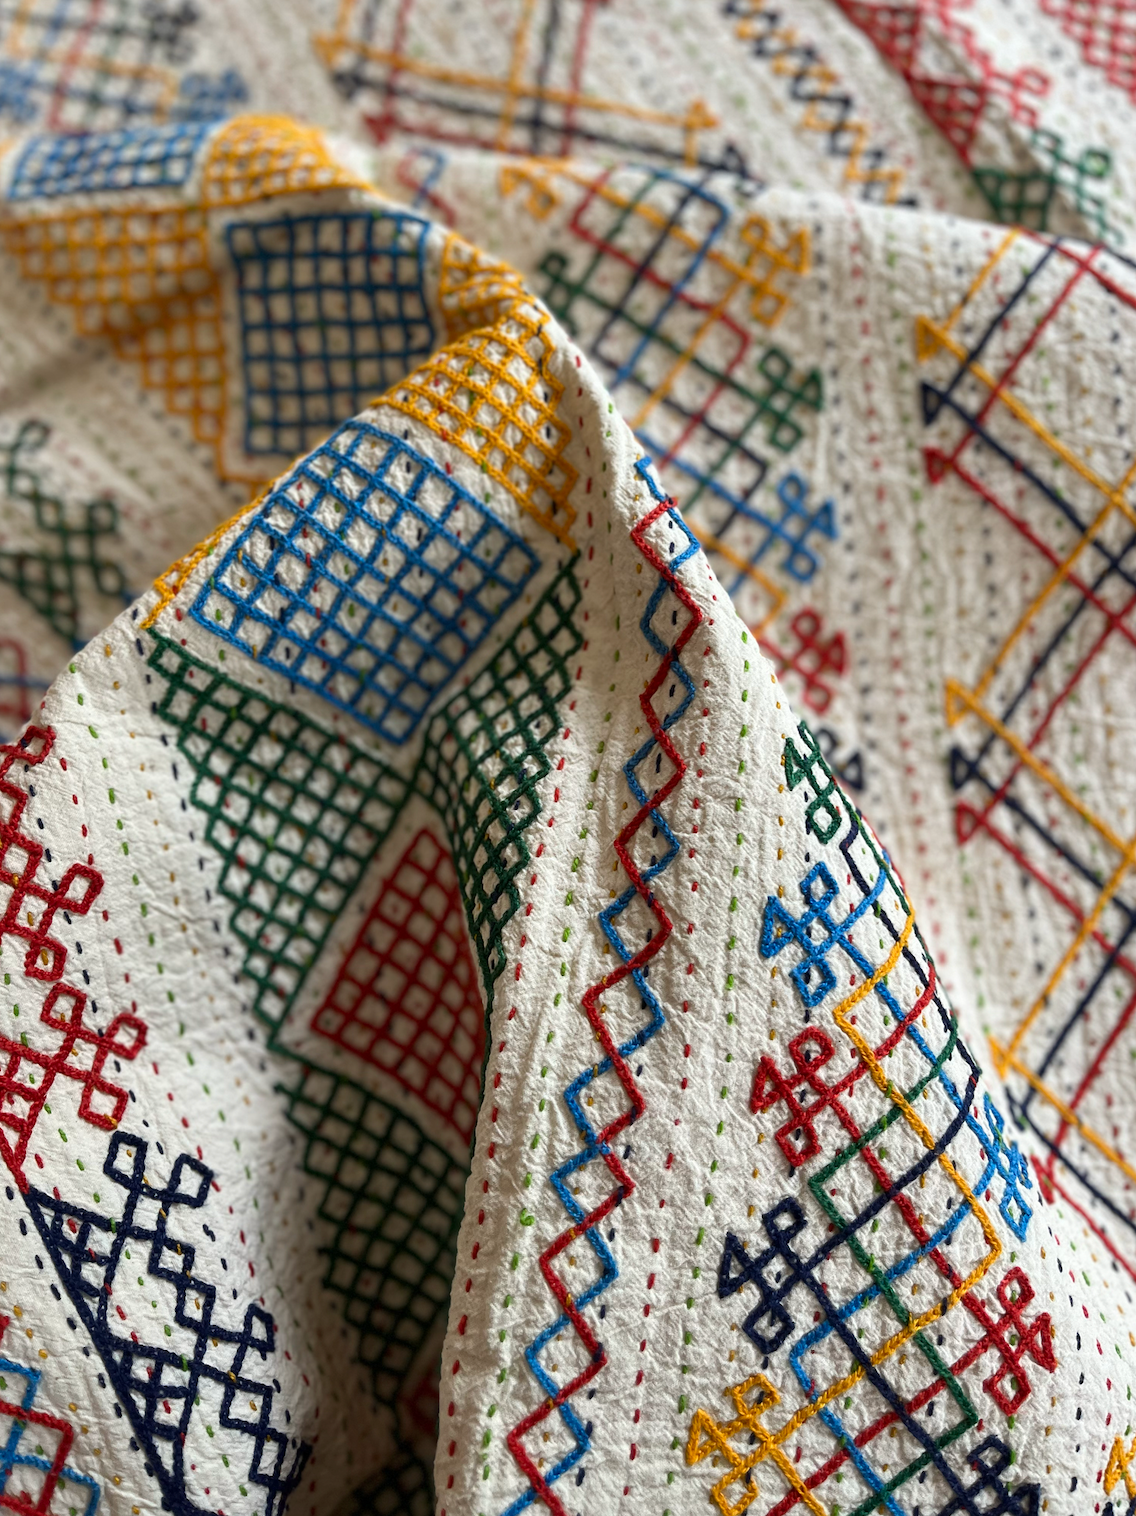 Multi Coloured Kantha Quilt - SMALL - MJS24